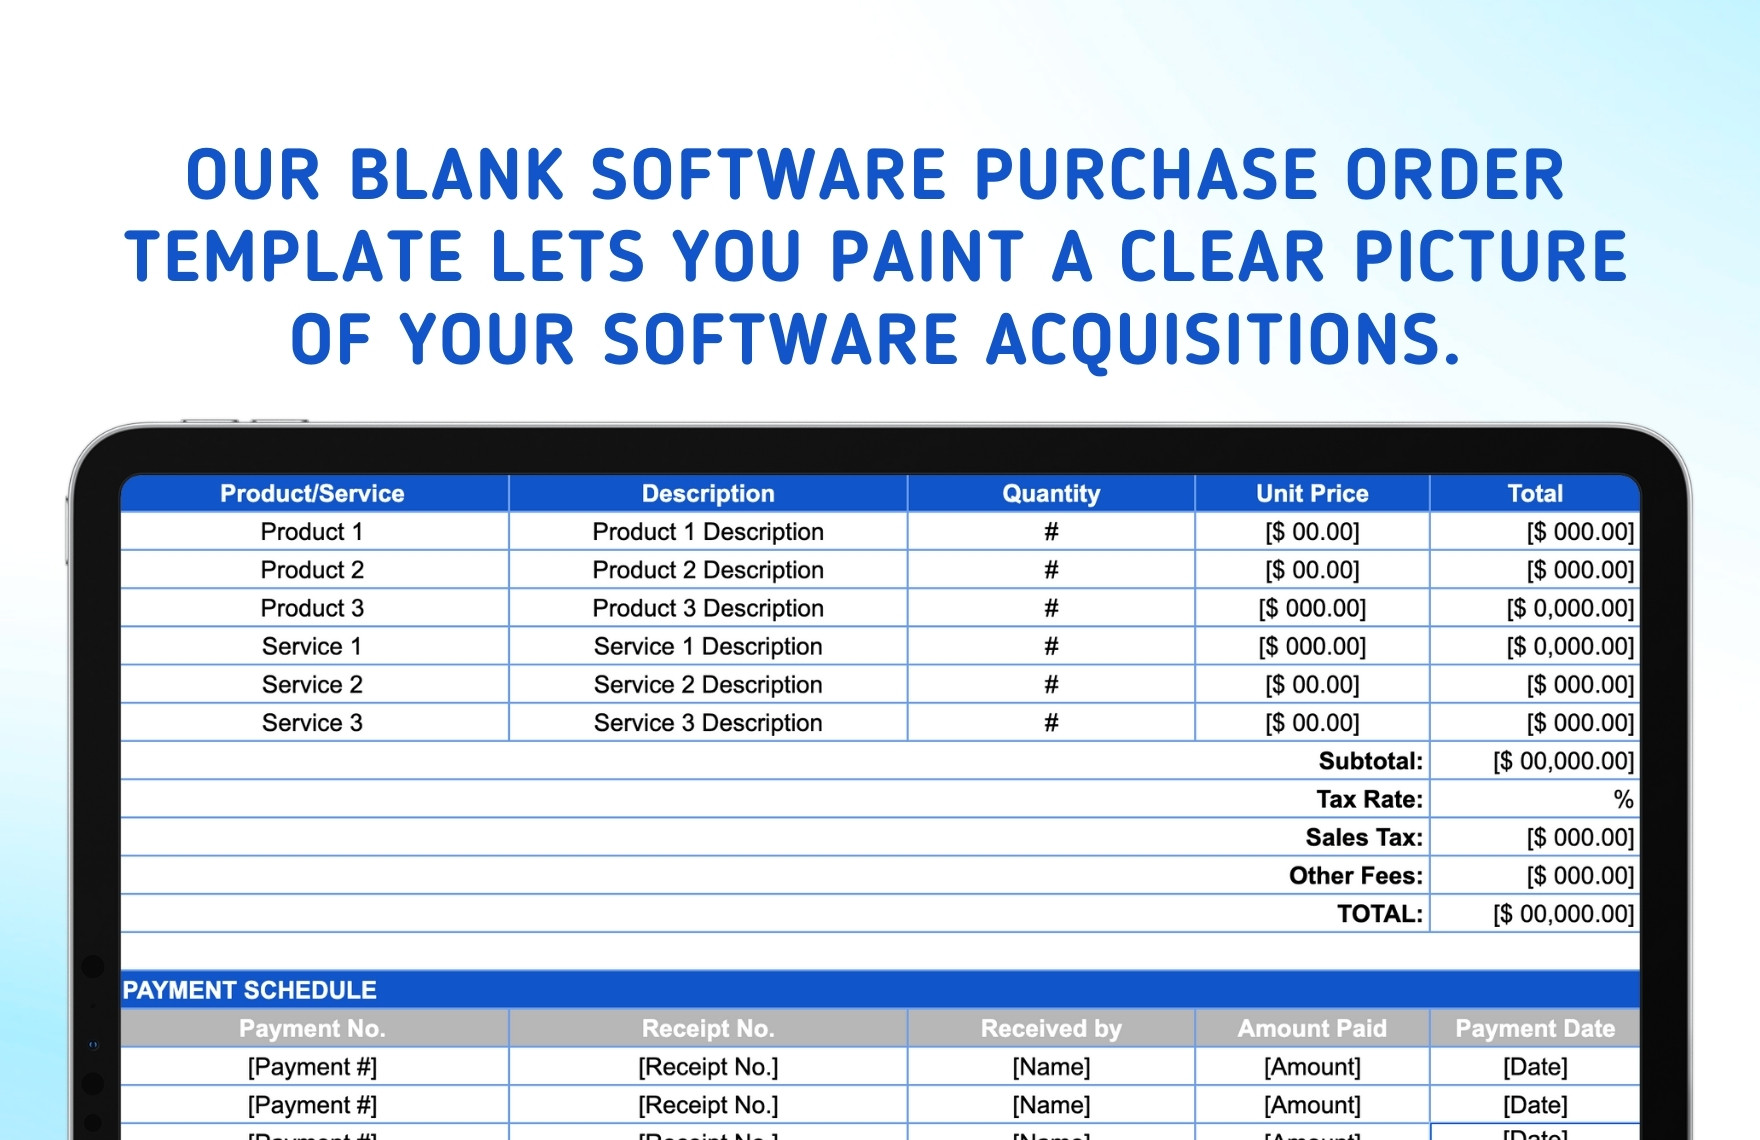 Blank Software Purchase Order Template